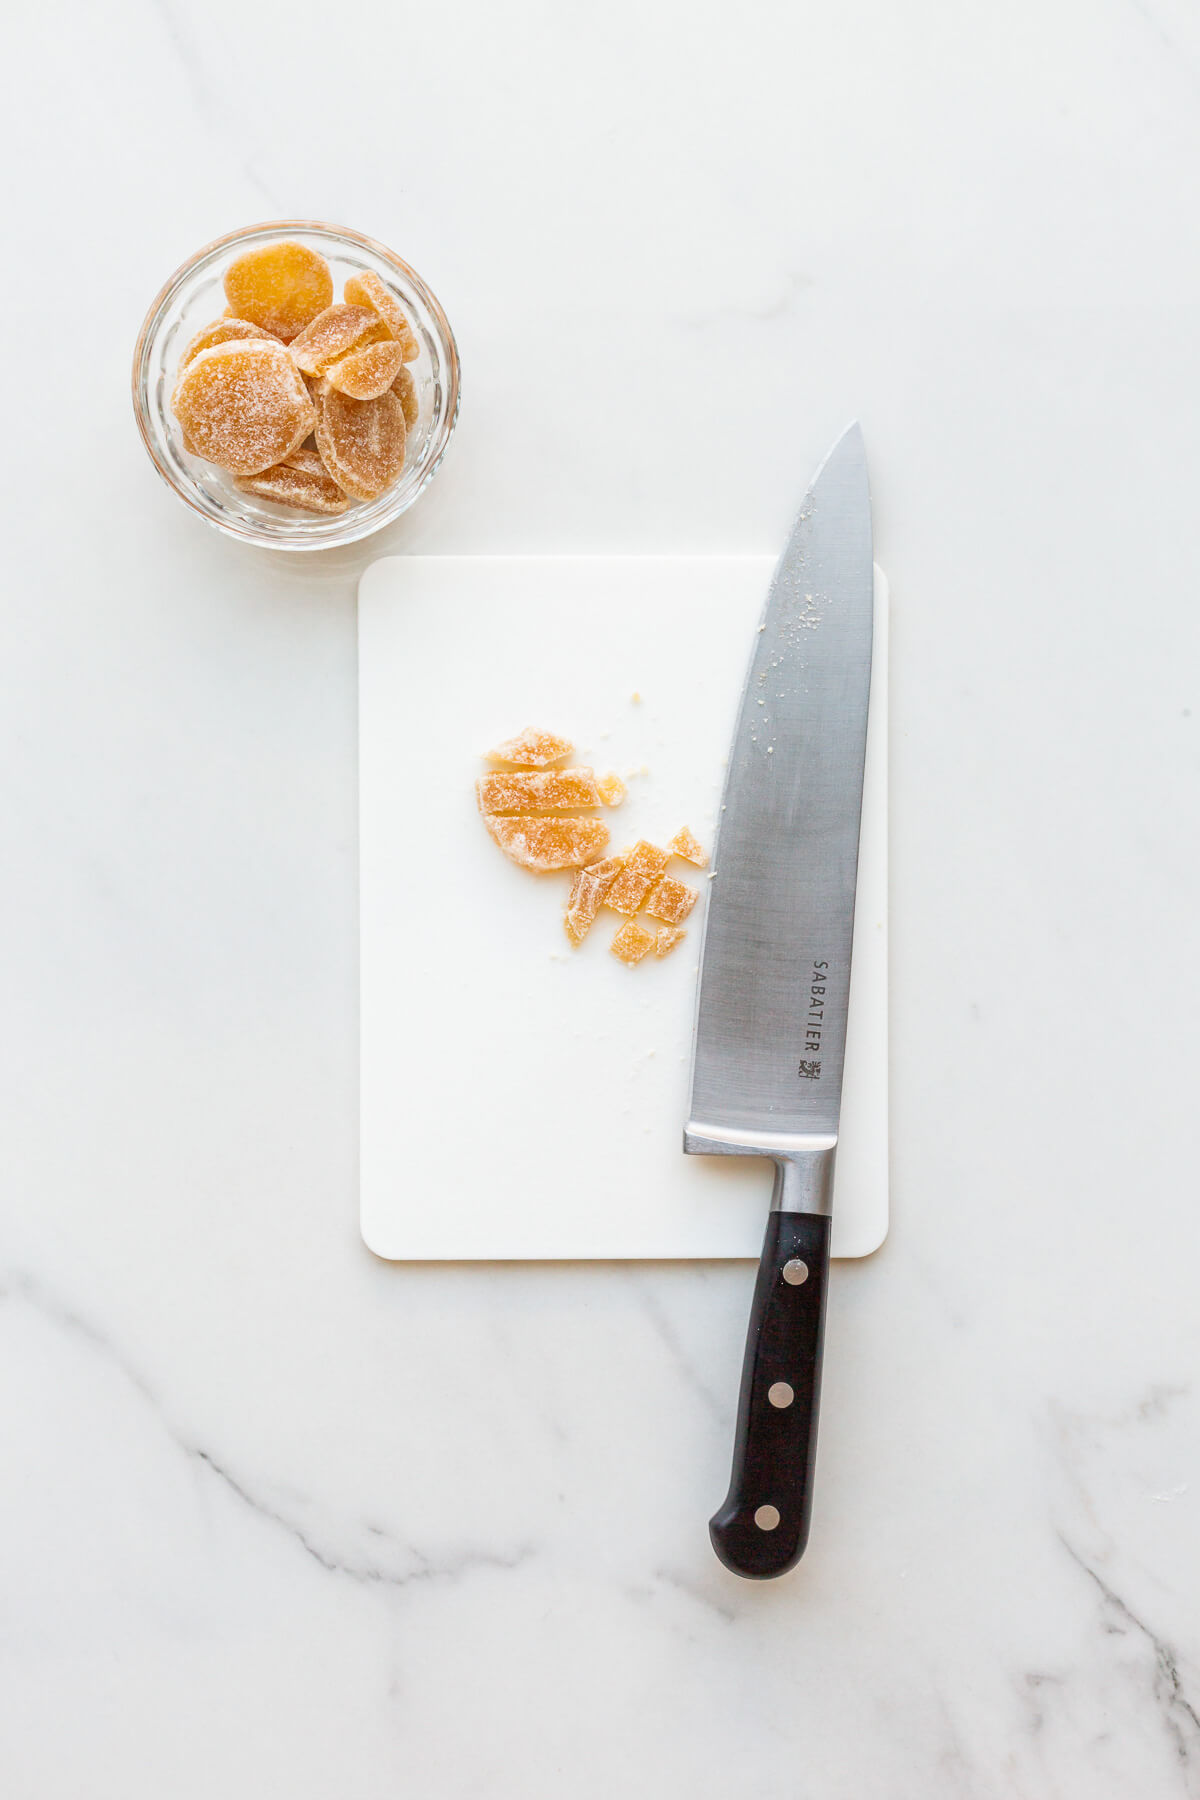 Chopping crystallized ginger with a chefs knife on a cutting board.